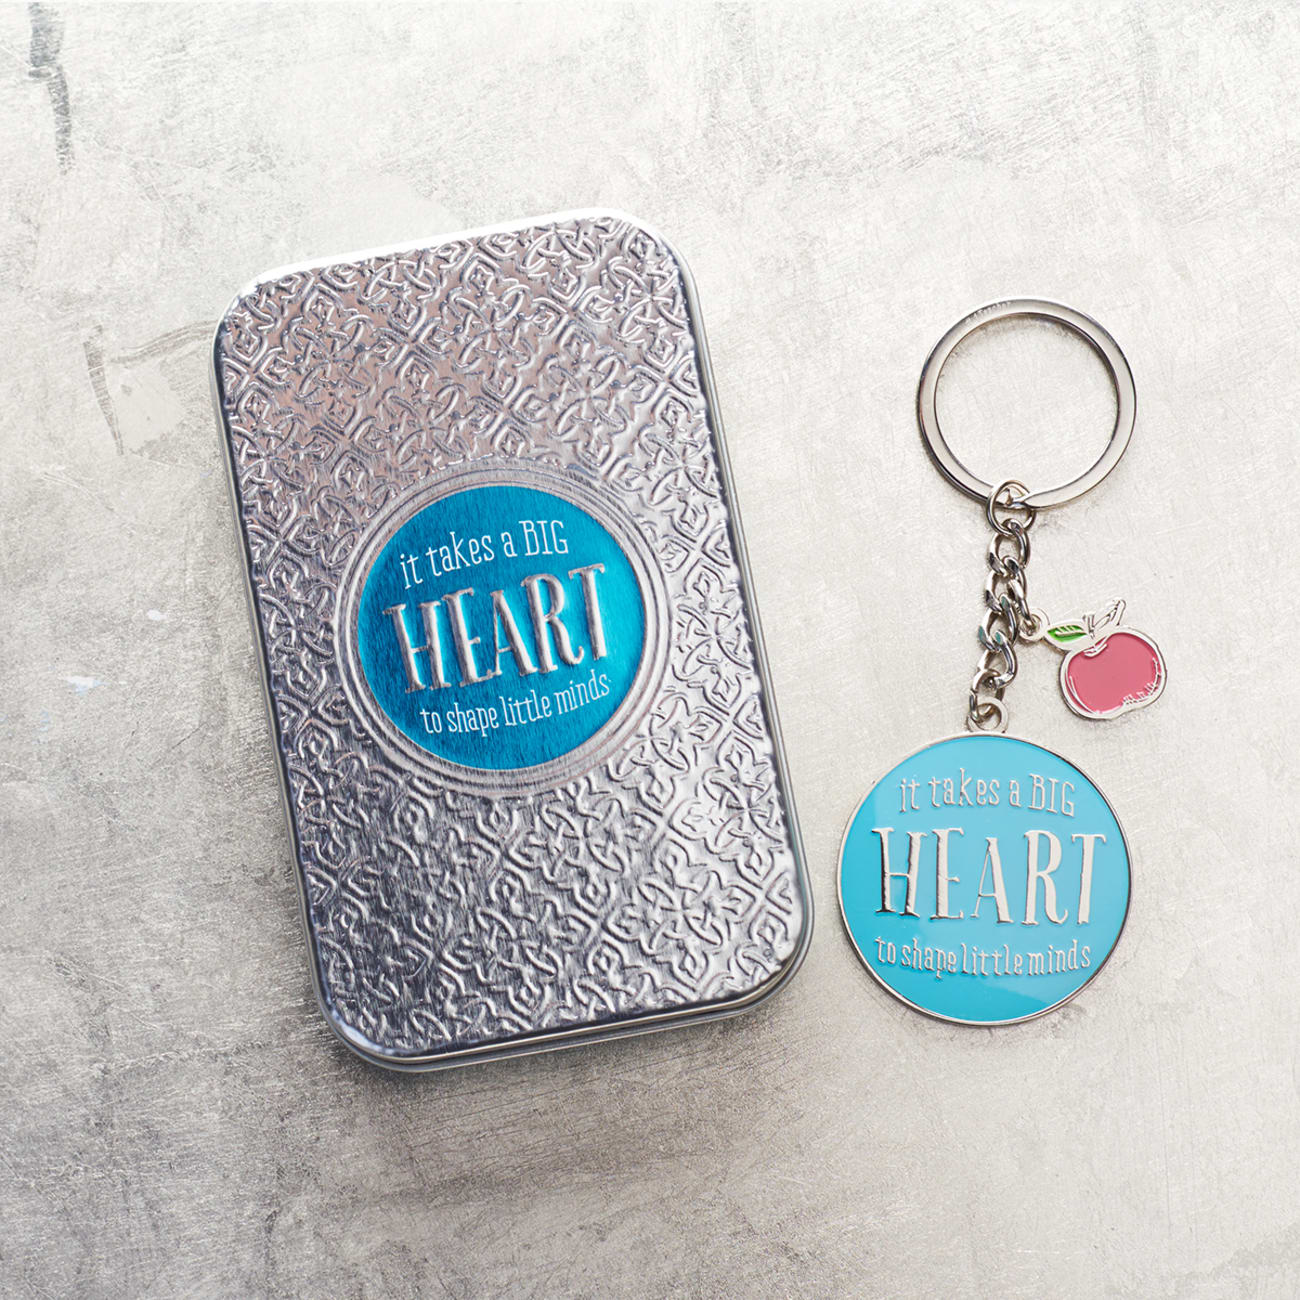 Metal Keyring in Tin: Blue, Apple, Let All That You Do Be Done in Love Novelty